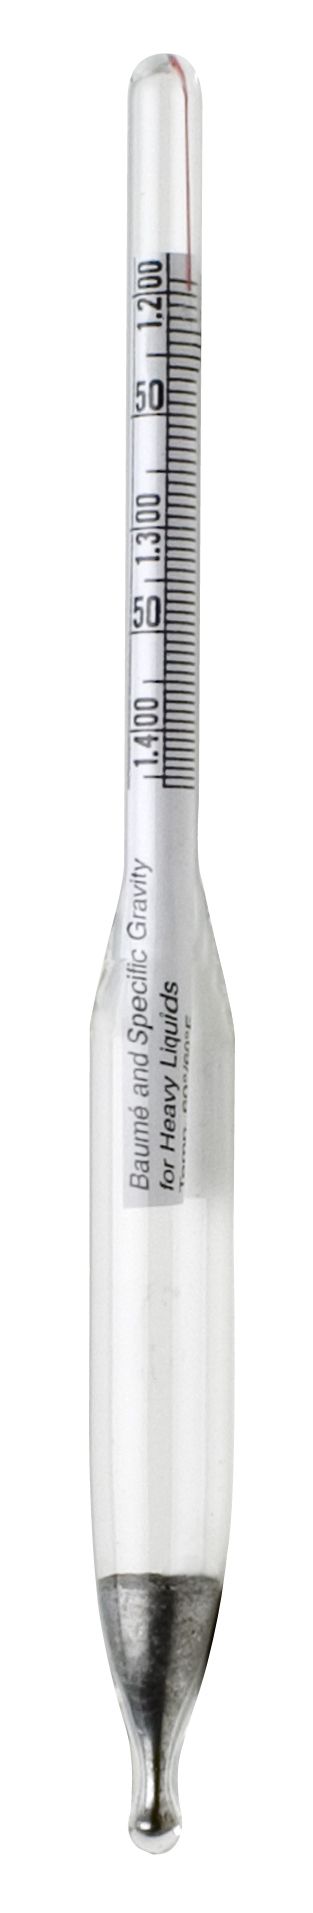 VWR® Specific Gravity/Relative Density and Baume Plain Form Hydrometers, Traceable to NIST